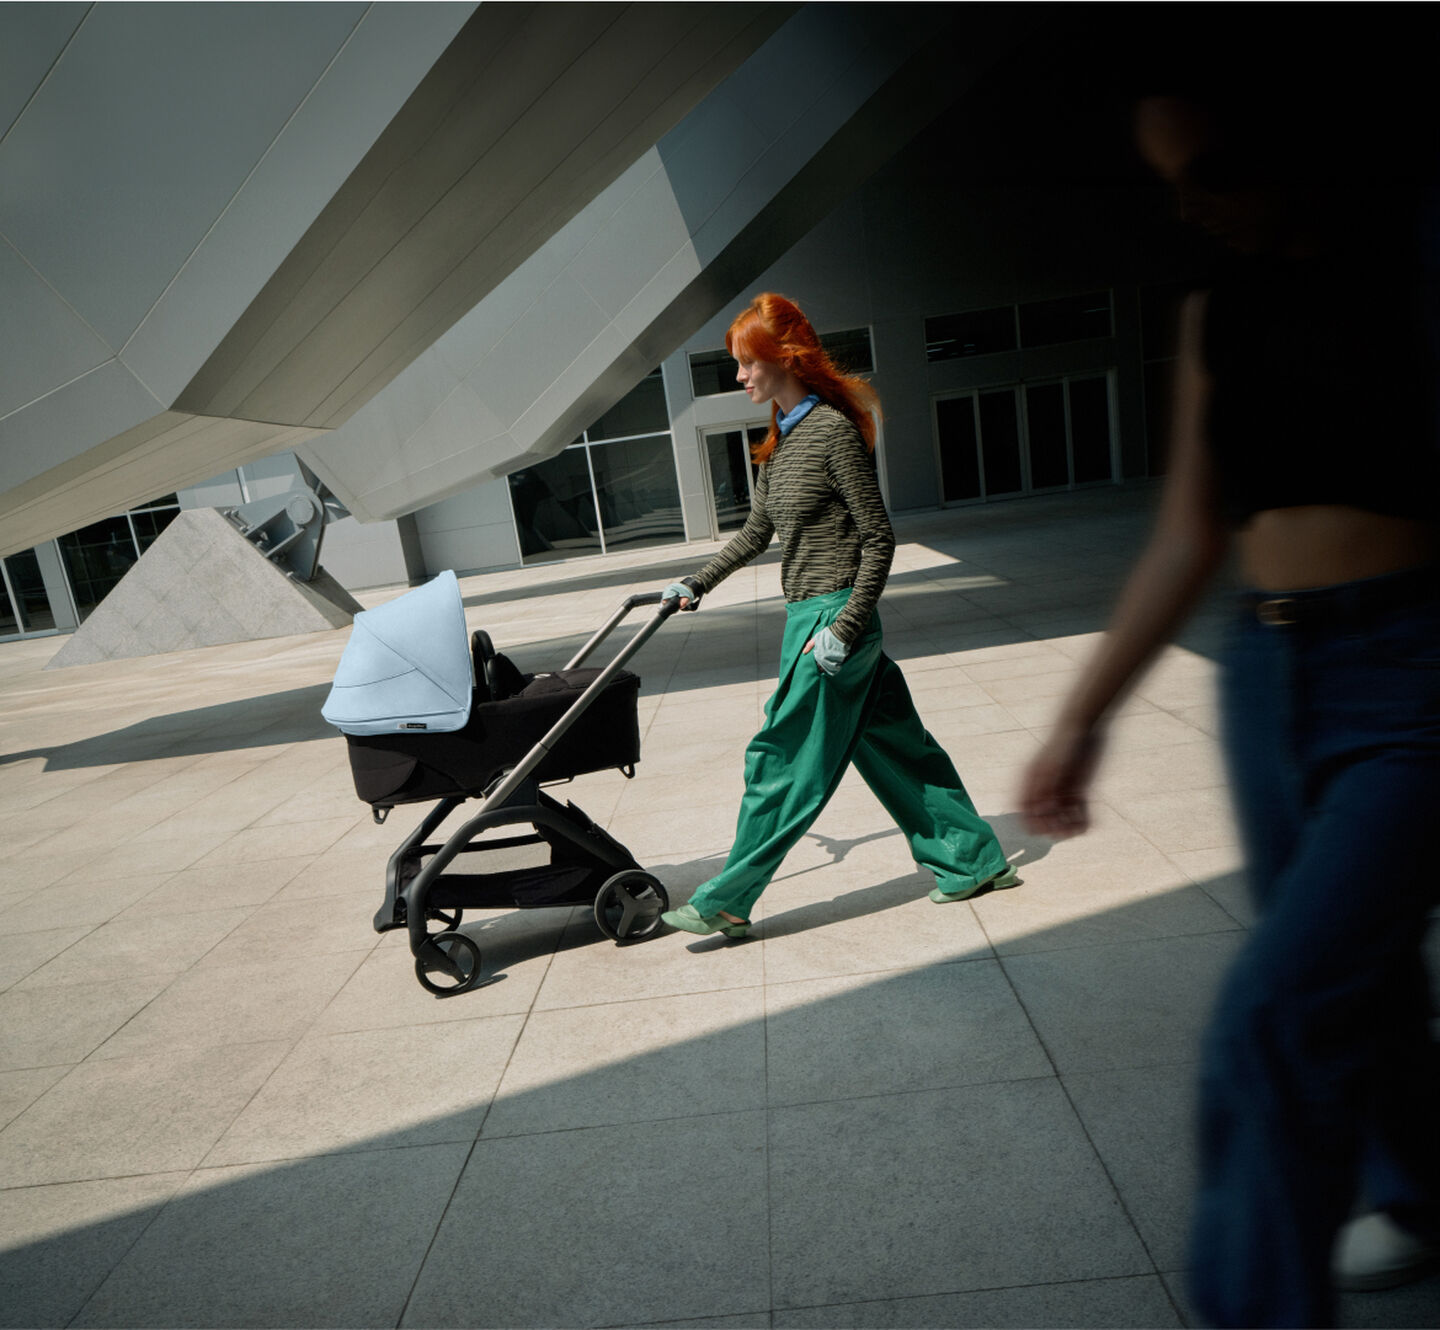 A confident mom walks with her baby in a Bugaboo Dragonfly city pram as she glides past a futuristic building.